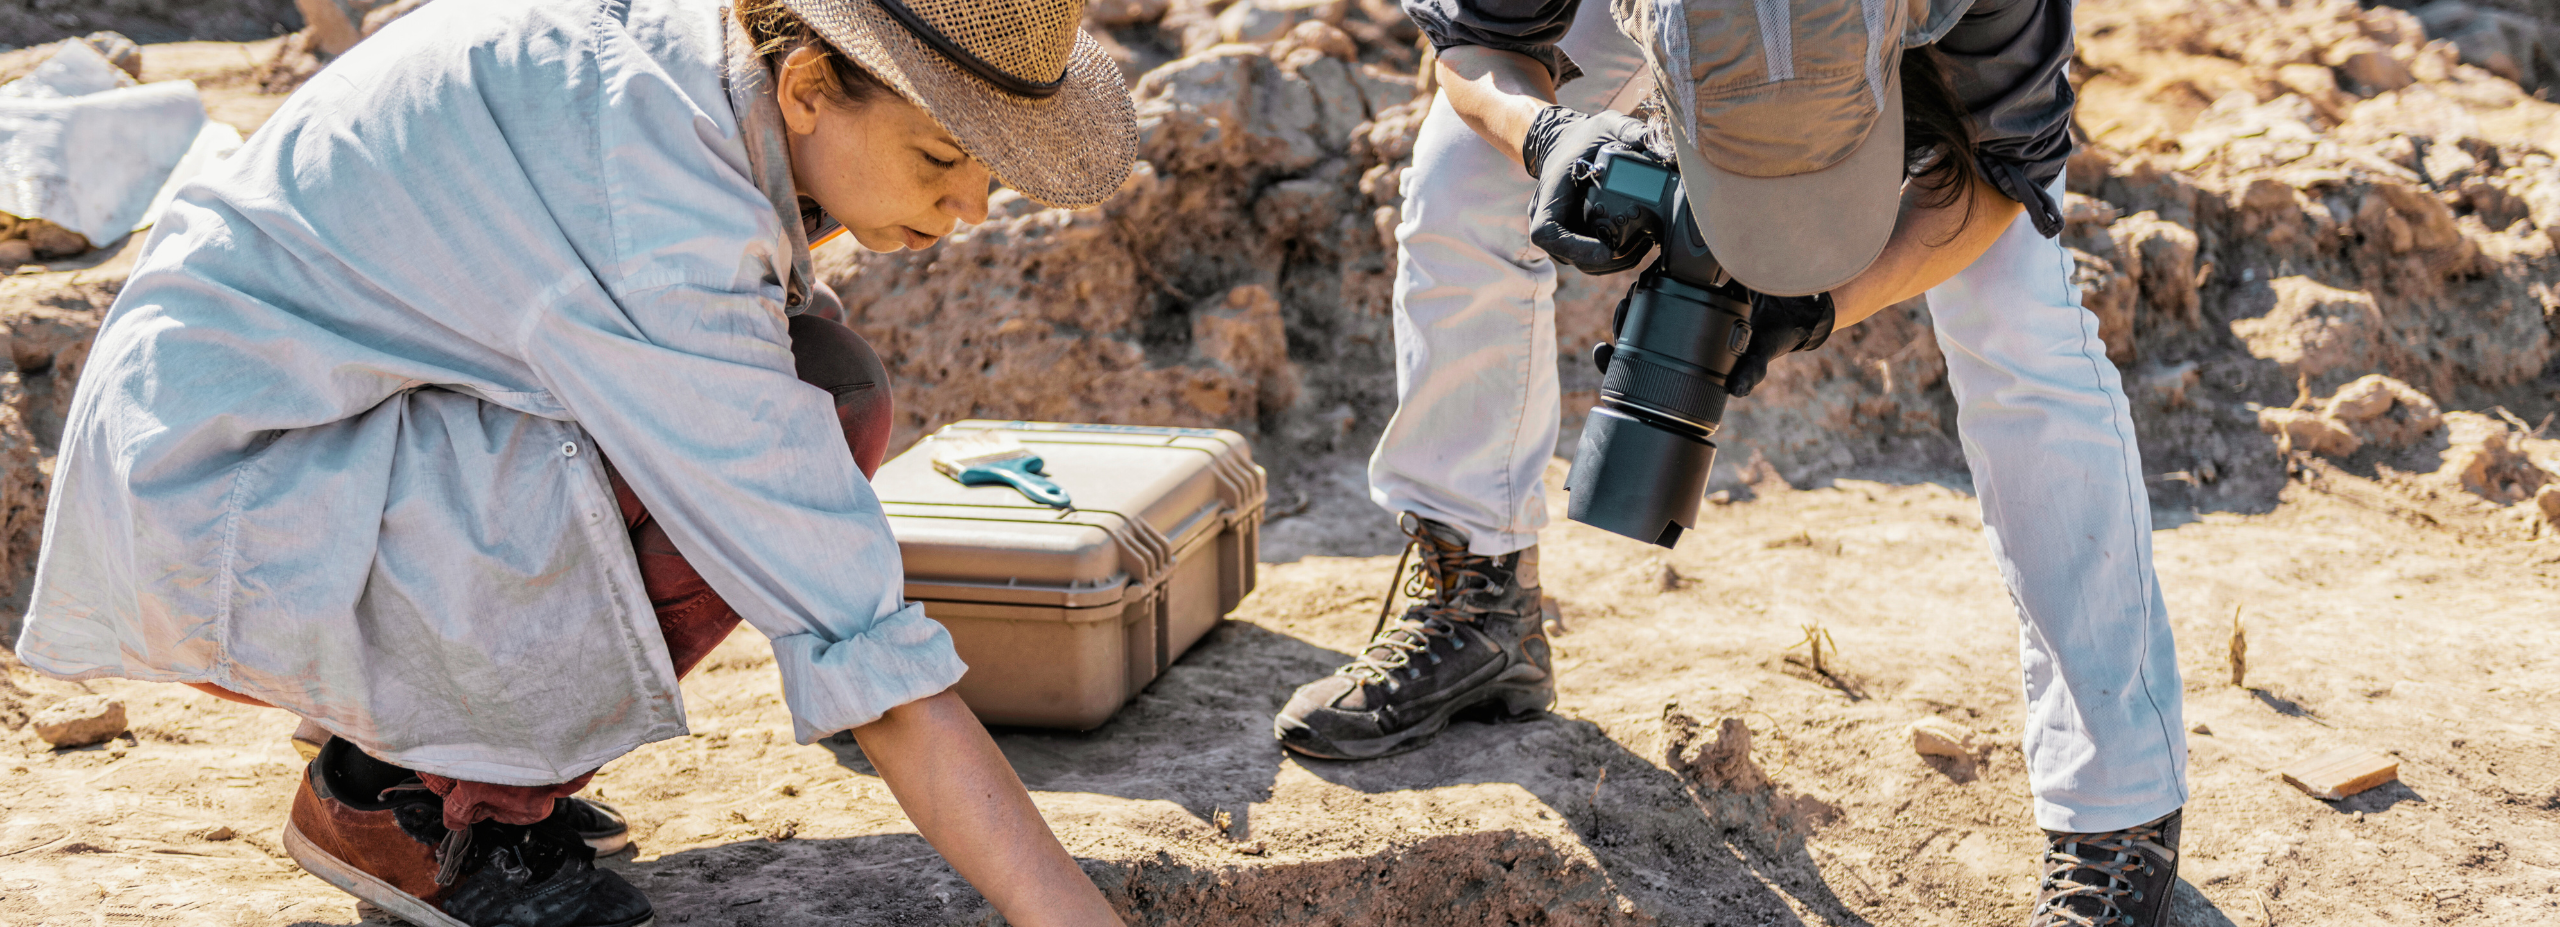 An image of a archaeologist working on a site. Beside her, a man photographs the excavation site. 